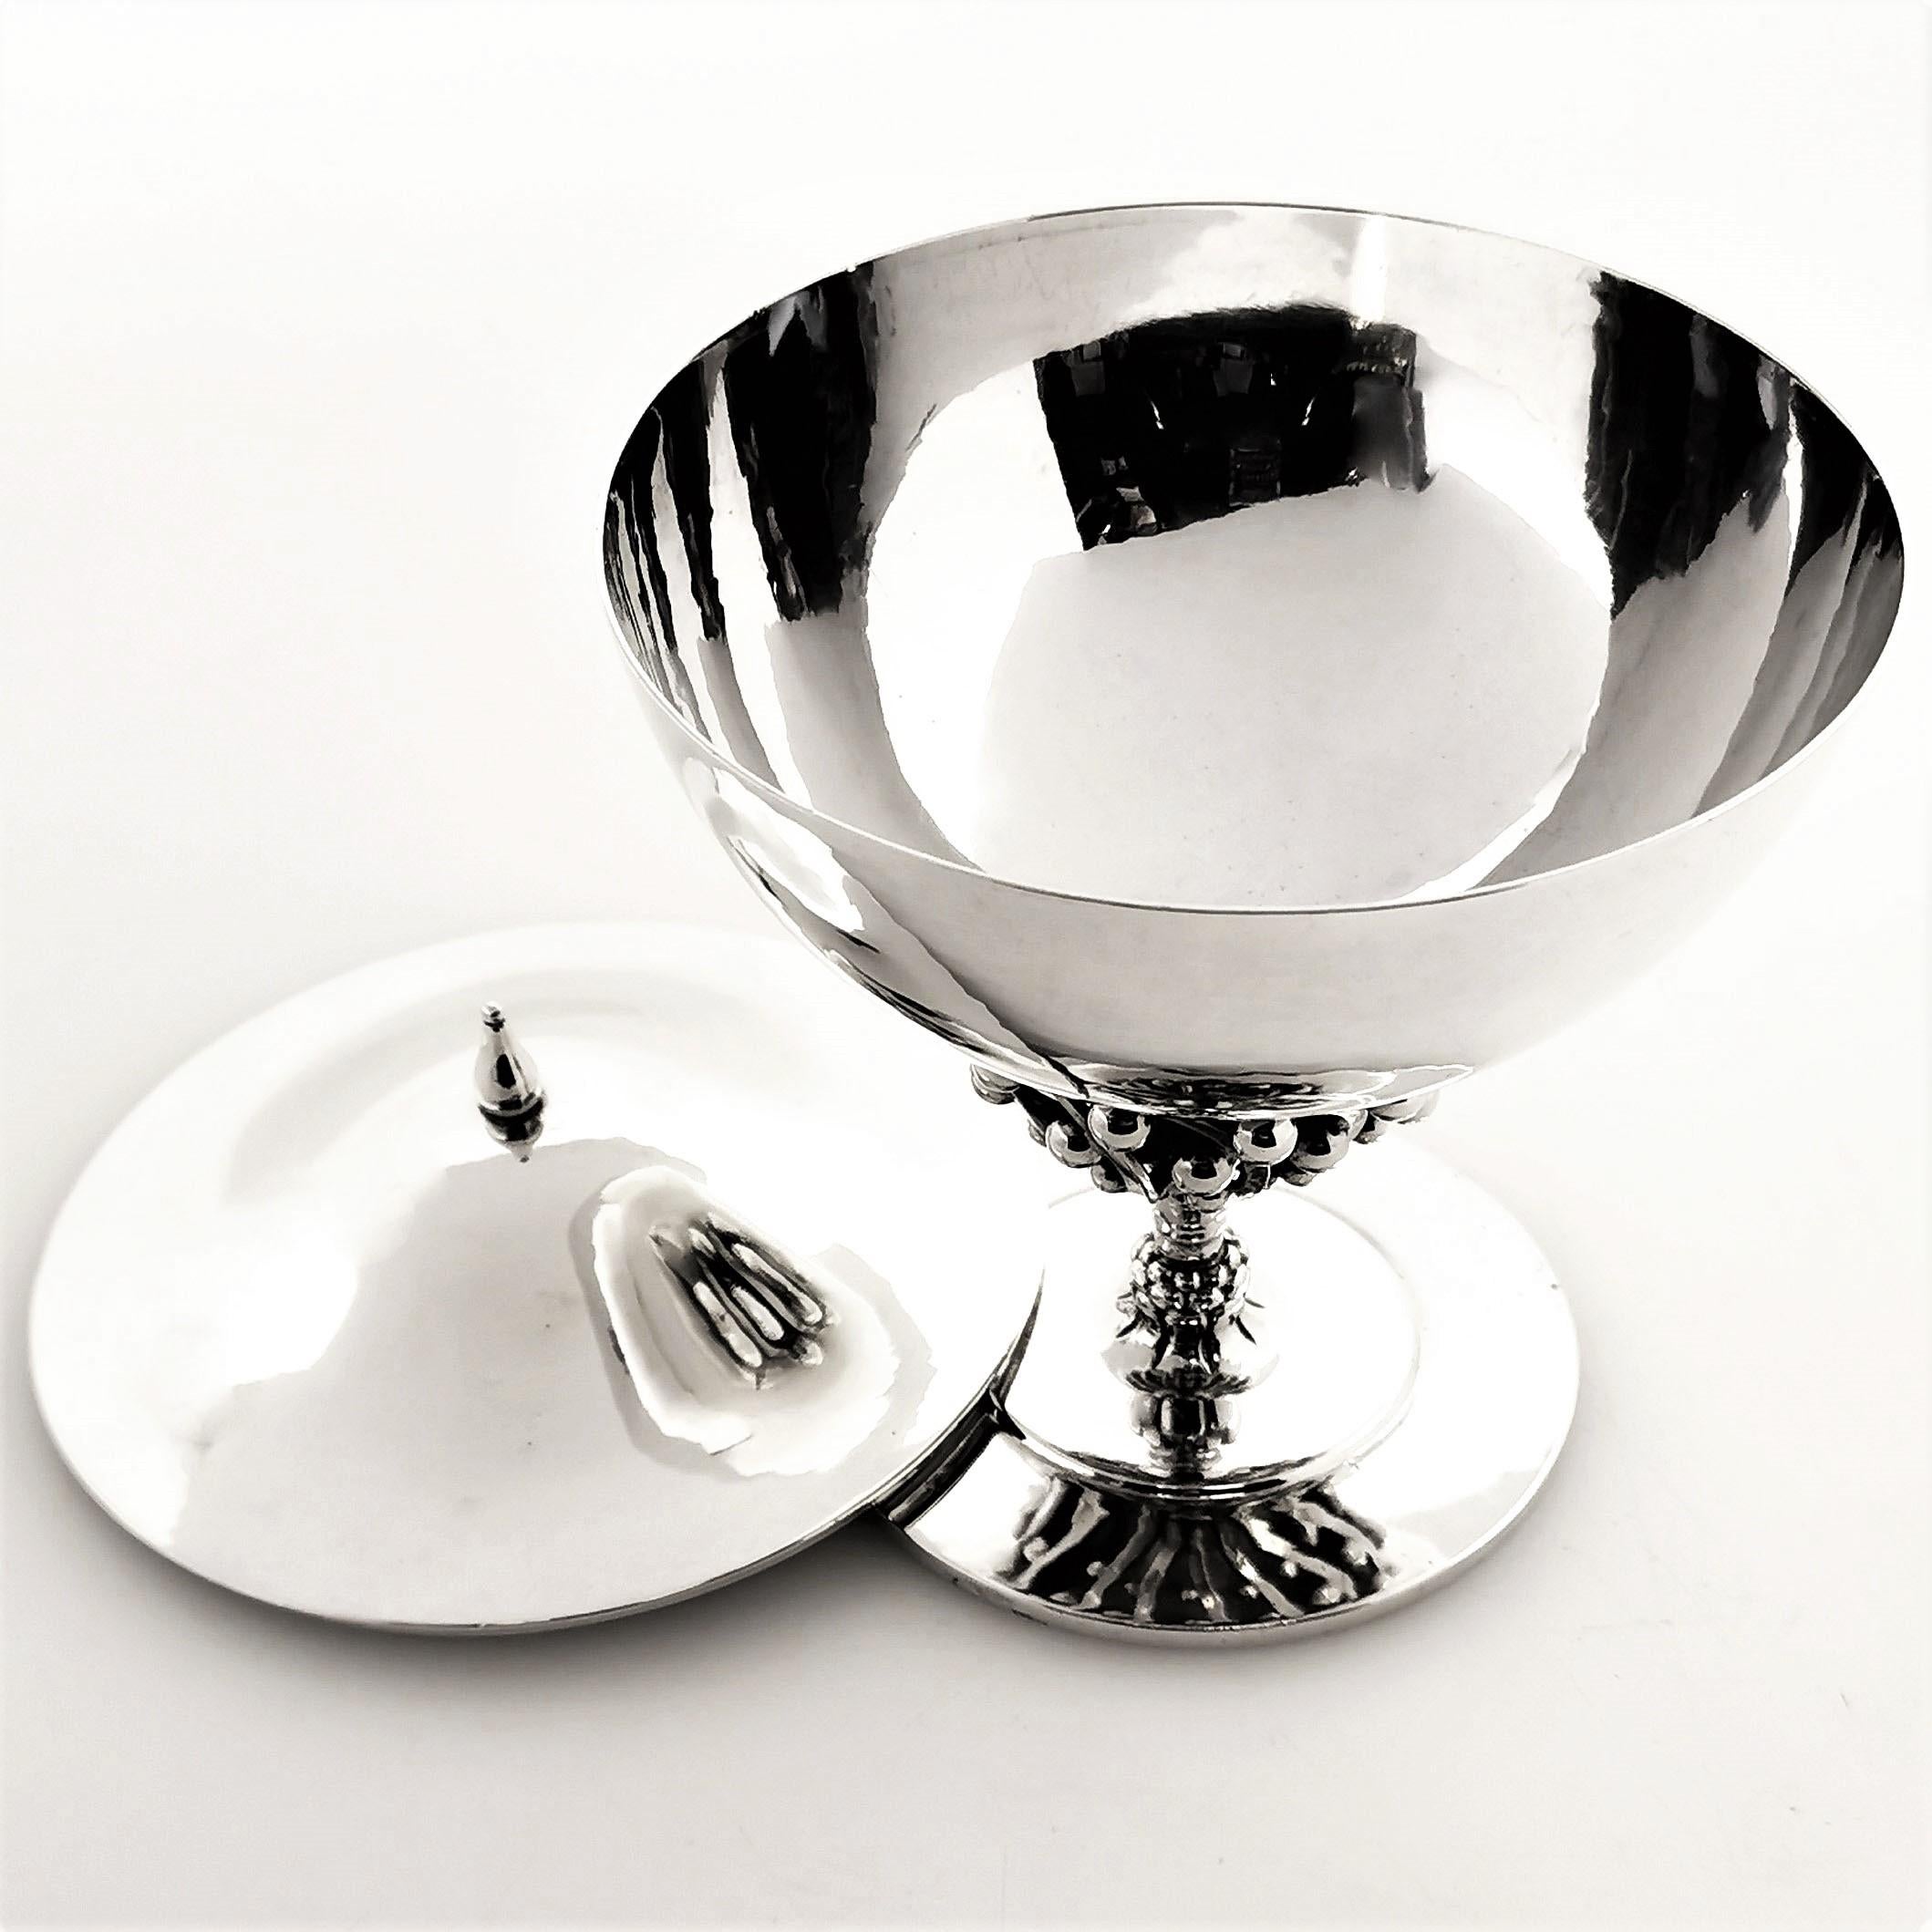 20th Century Georg Jensen Danish Silver Dish and Cover / Lidded Bowl, c. 1945-1977